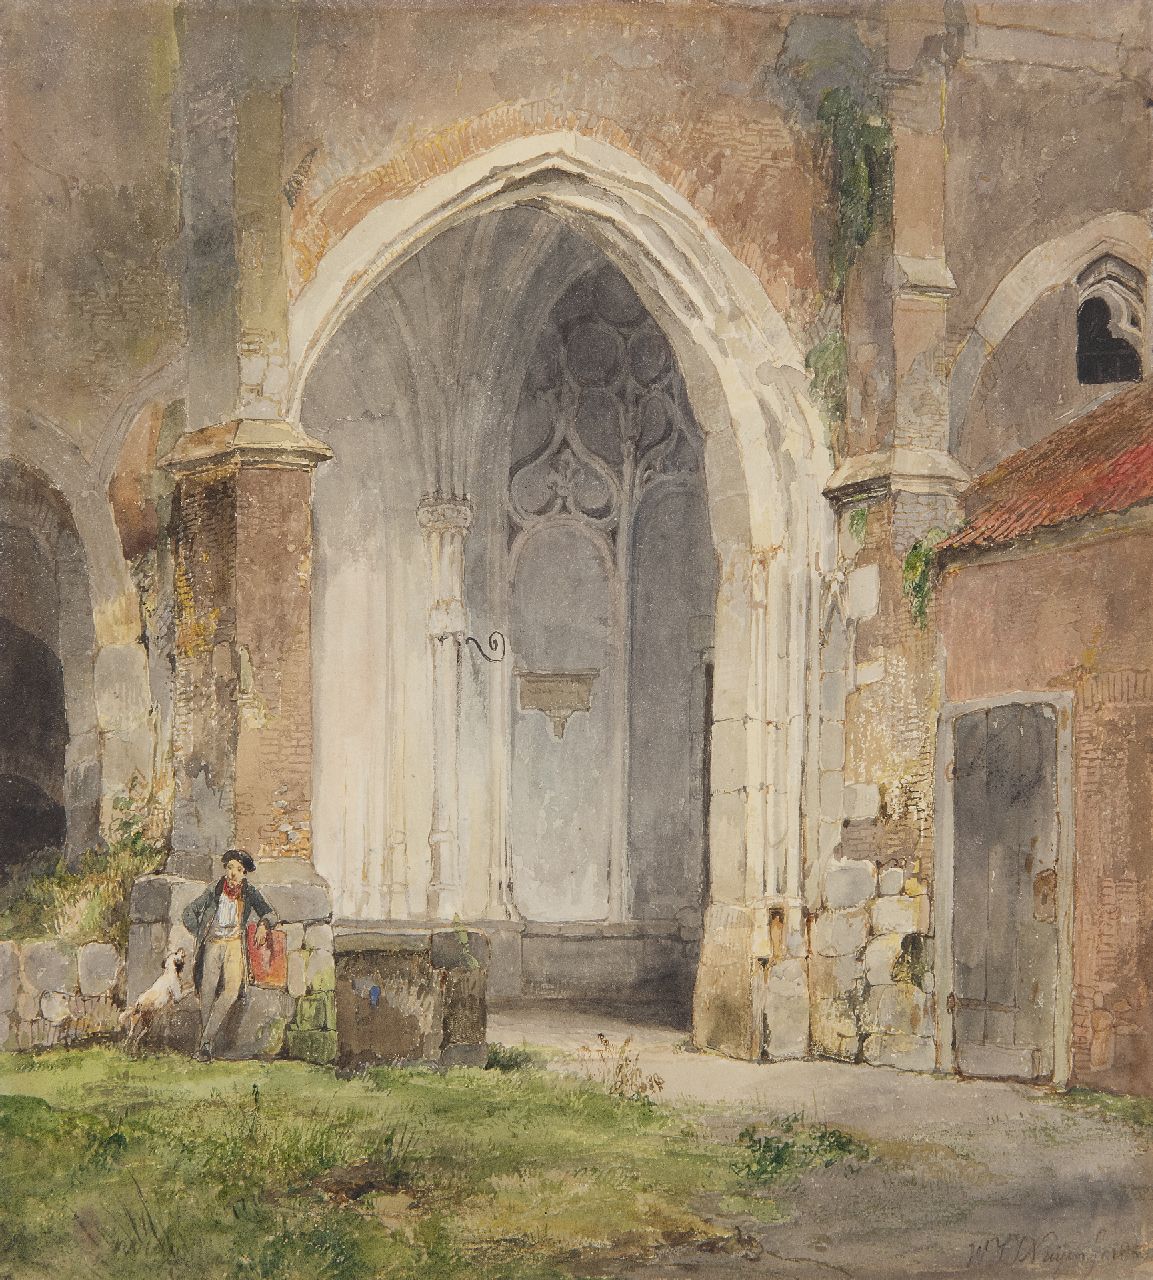 Nuijen W.J.J.  | Wijnandus Johannes Josephus 'Wijnand' Nuijen | Watercolours and drawings offered for sale | Man and his dog in the cloister of the Dom of Utrecht, watercolour on paper 26.5 x 23.6 cm, signed l.r. and dated 1833